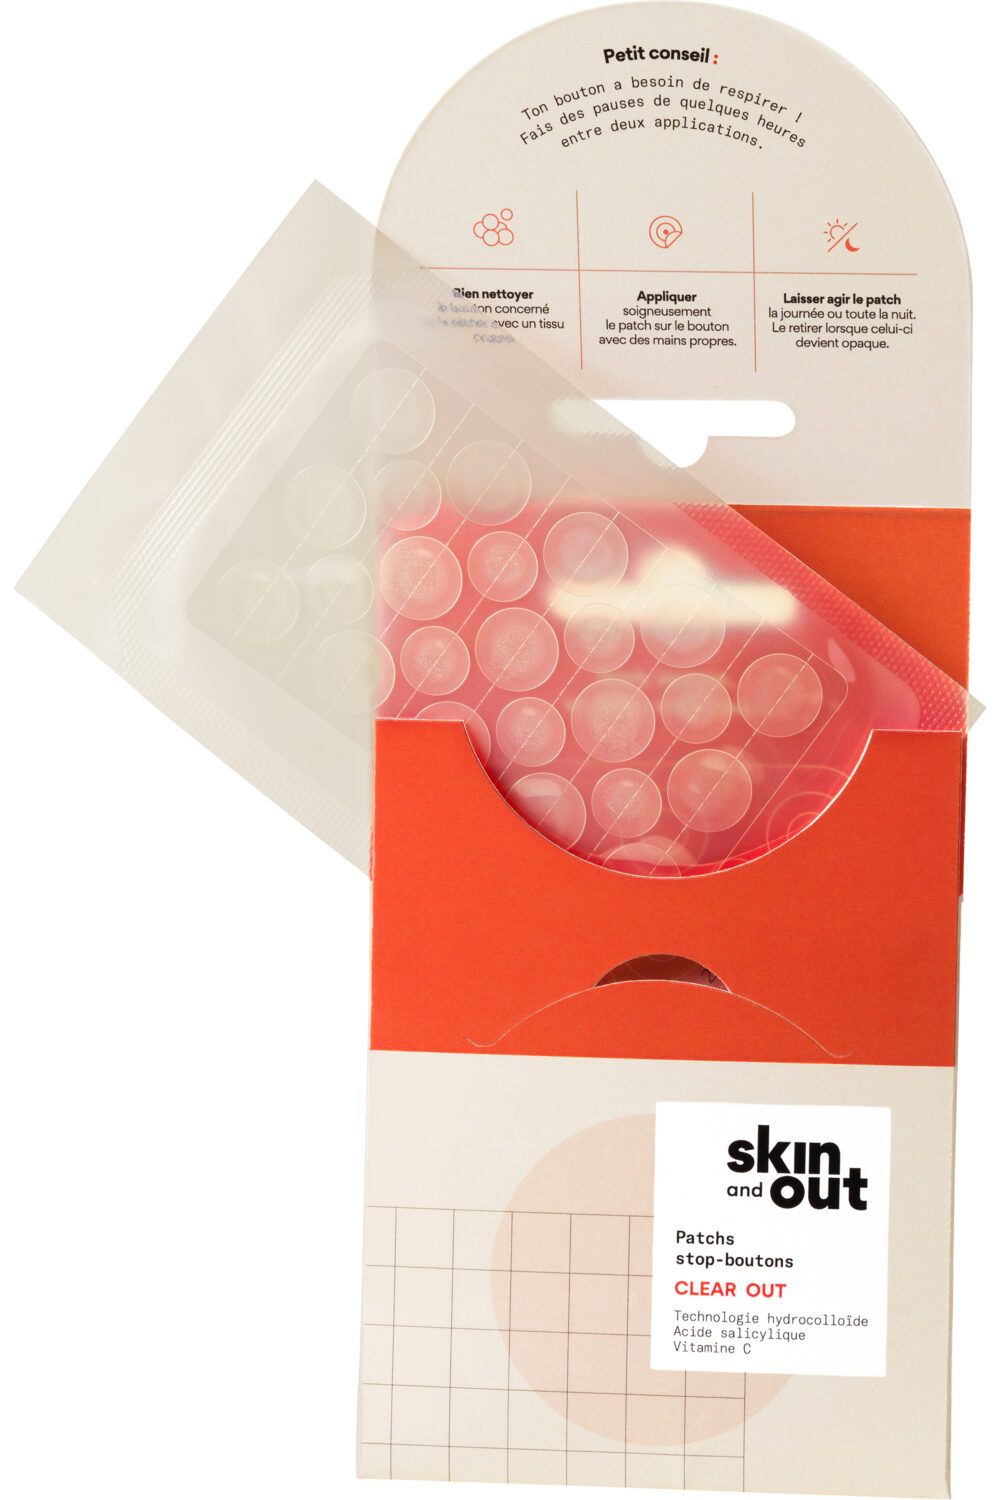 Skin & Out - Patchs stop-boutons Clear out 46 patchs